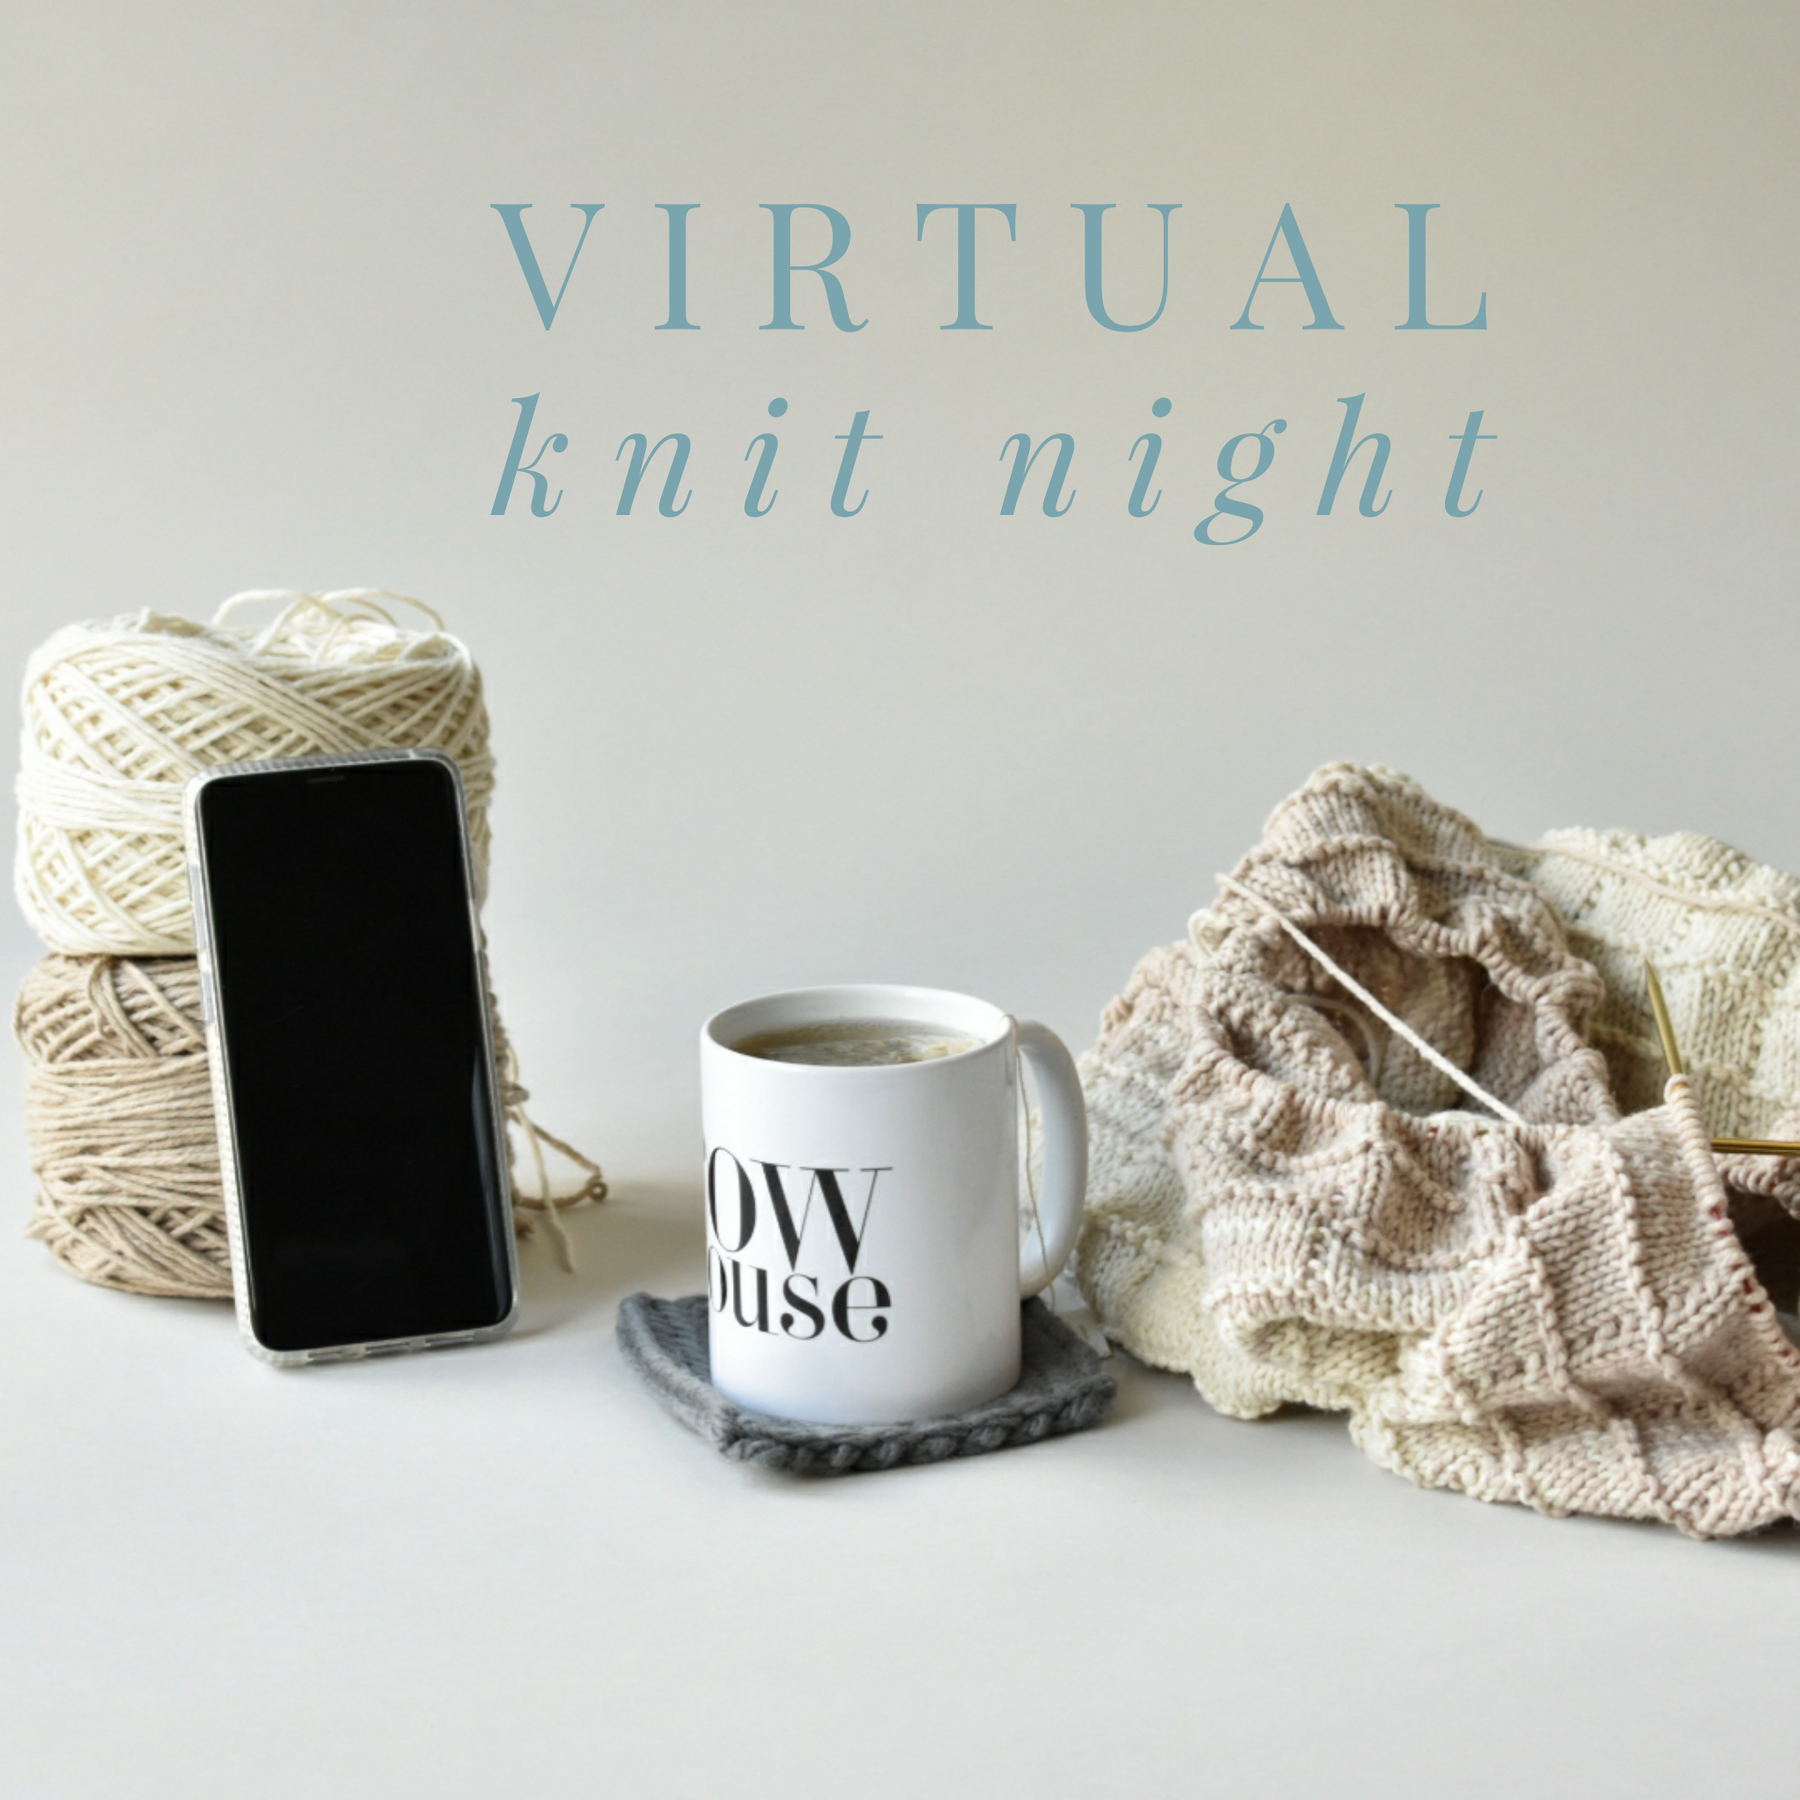 Join Us for Biweekly Virtual Knit Nights - East Coast (7PM ET)